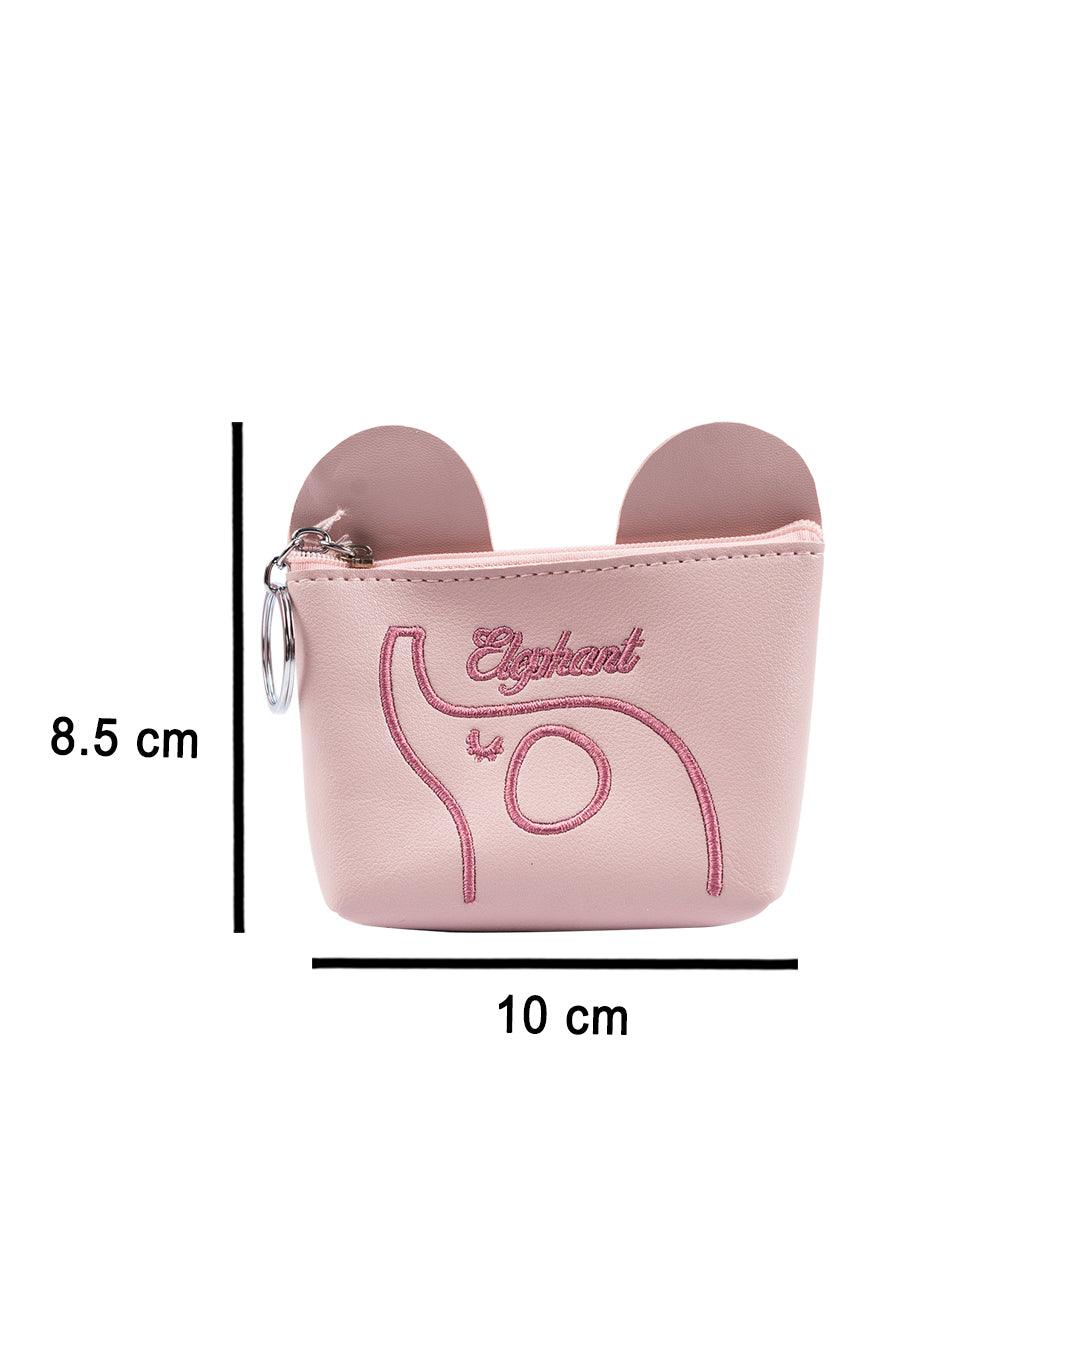 Donati Coin Pouch, Elephant Print, Pink, PU Leather - MARKET 99